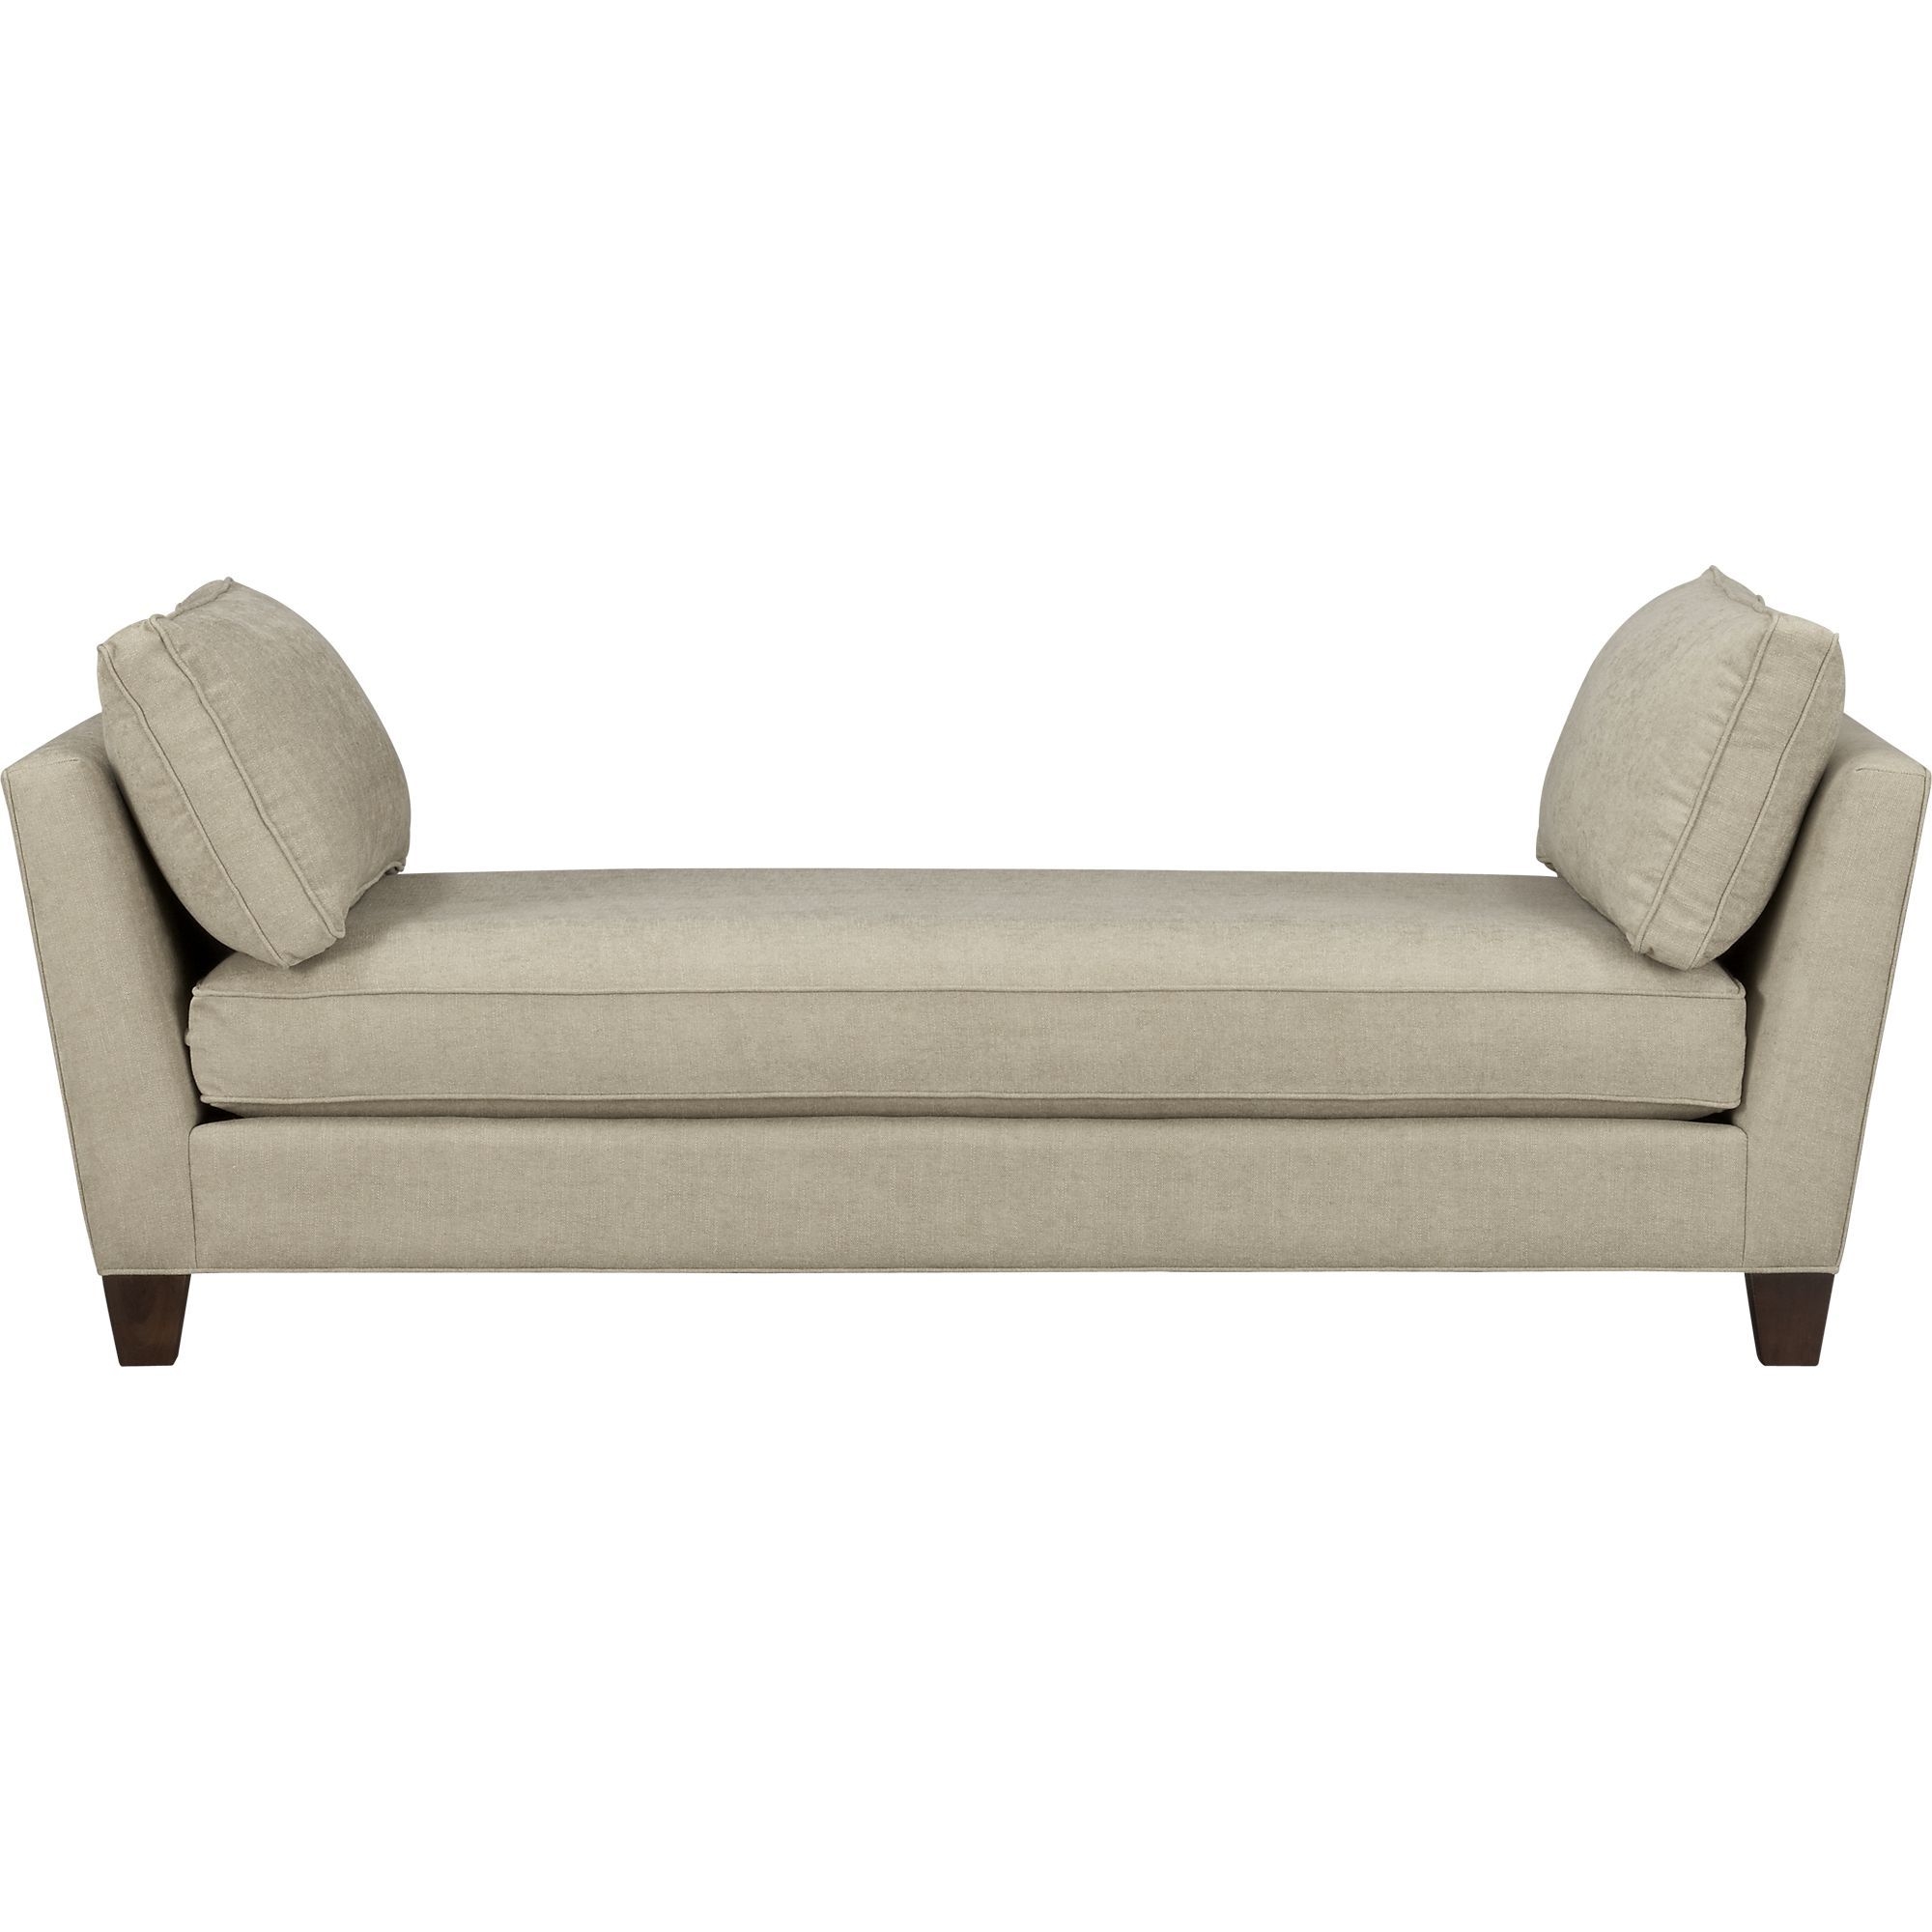 Backless sofa daybed